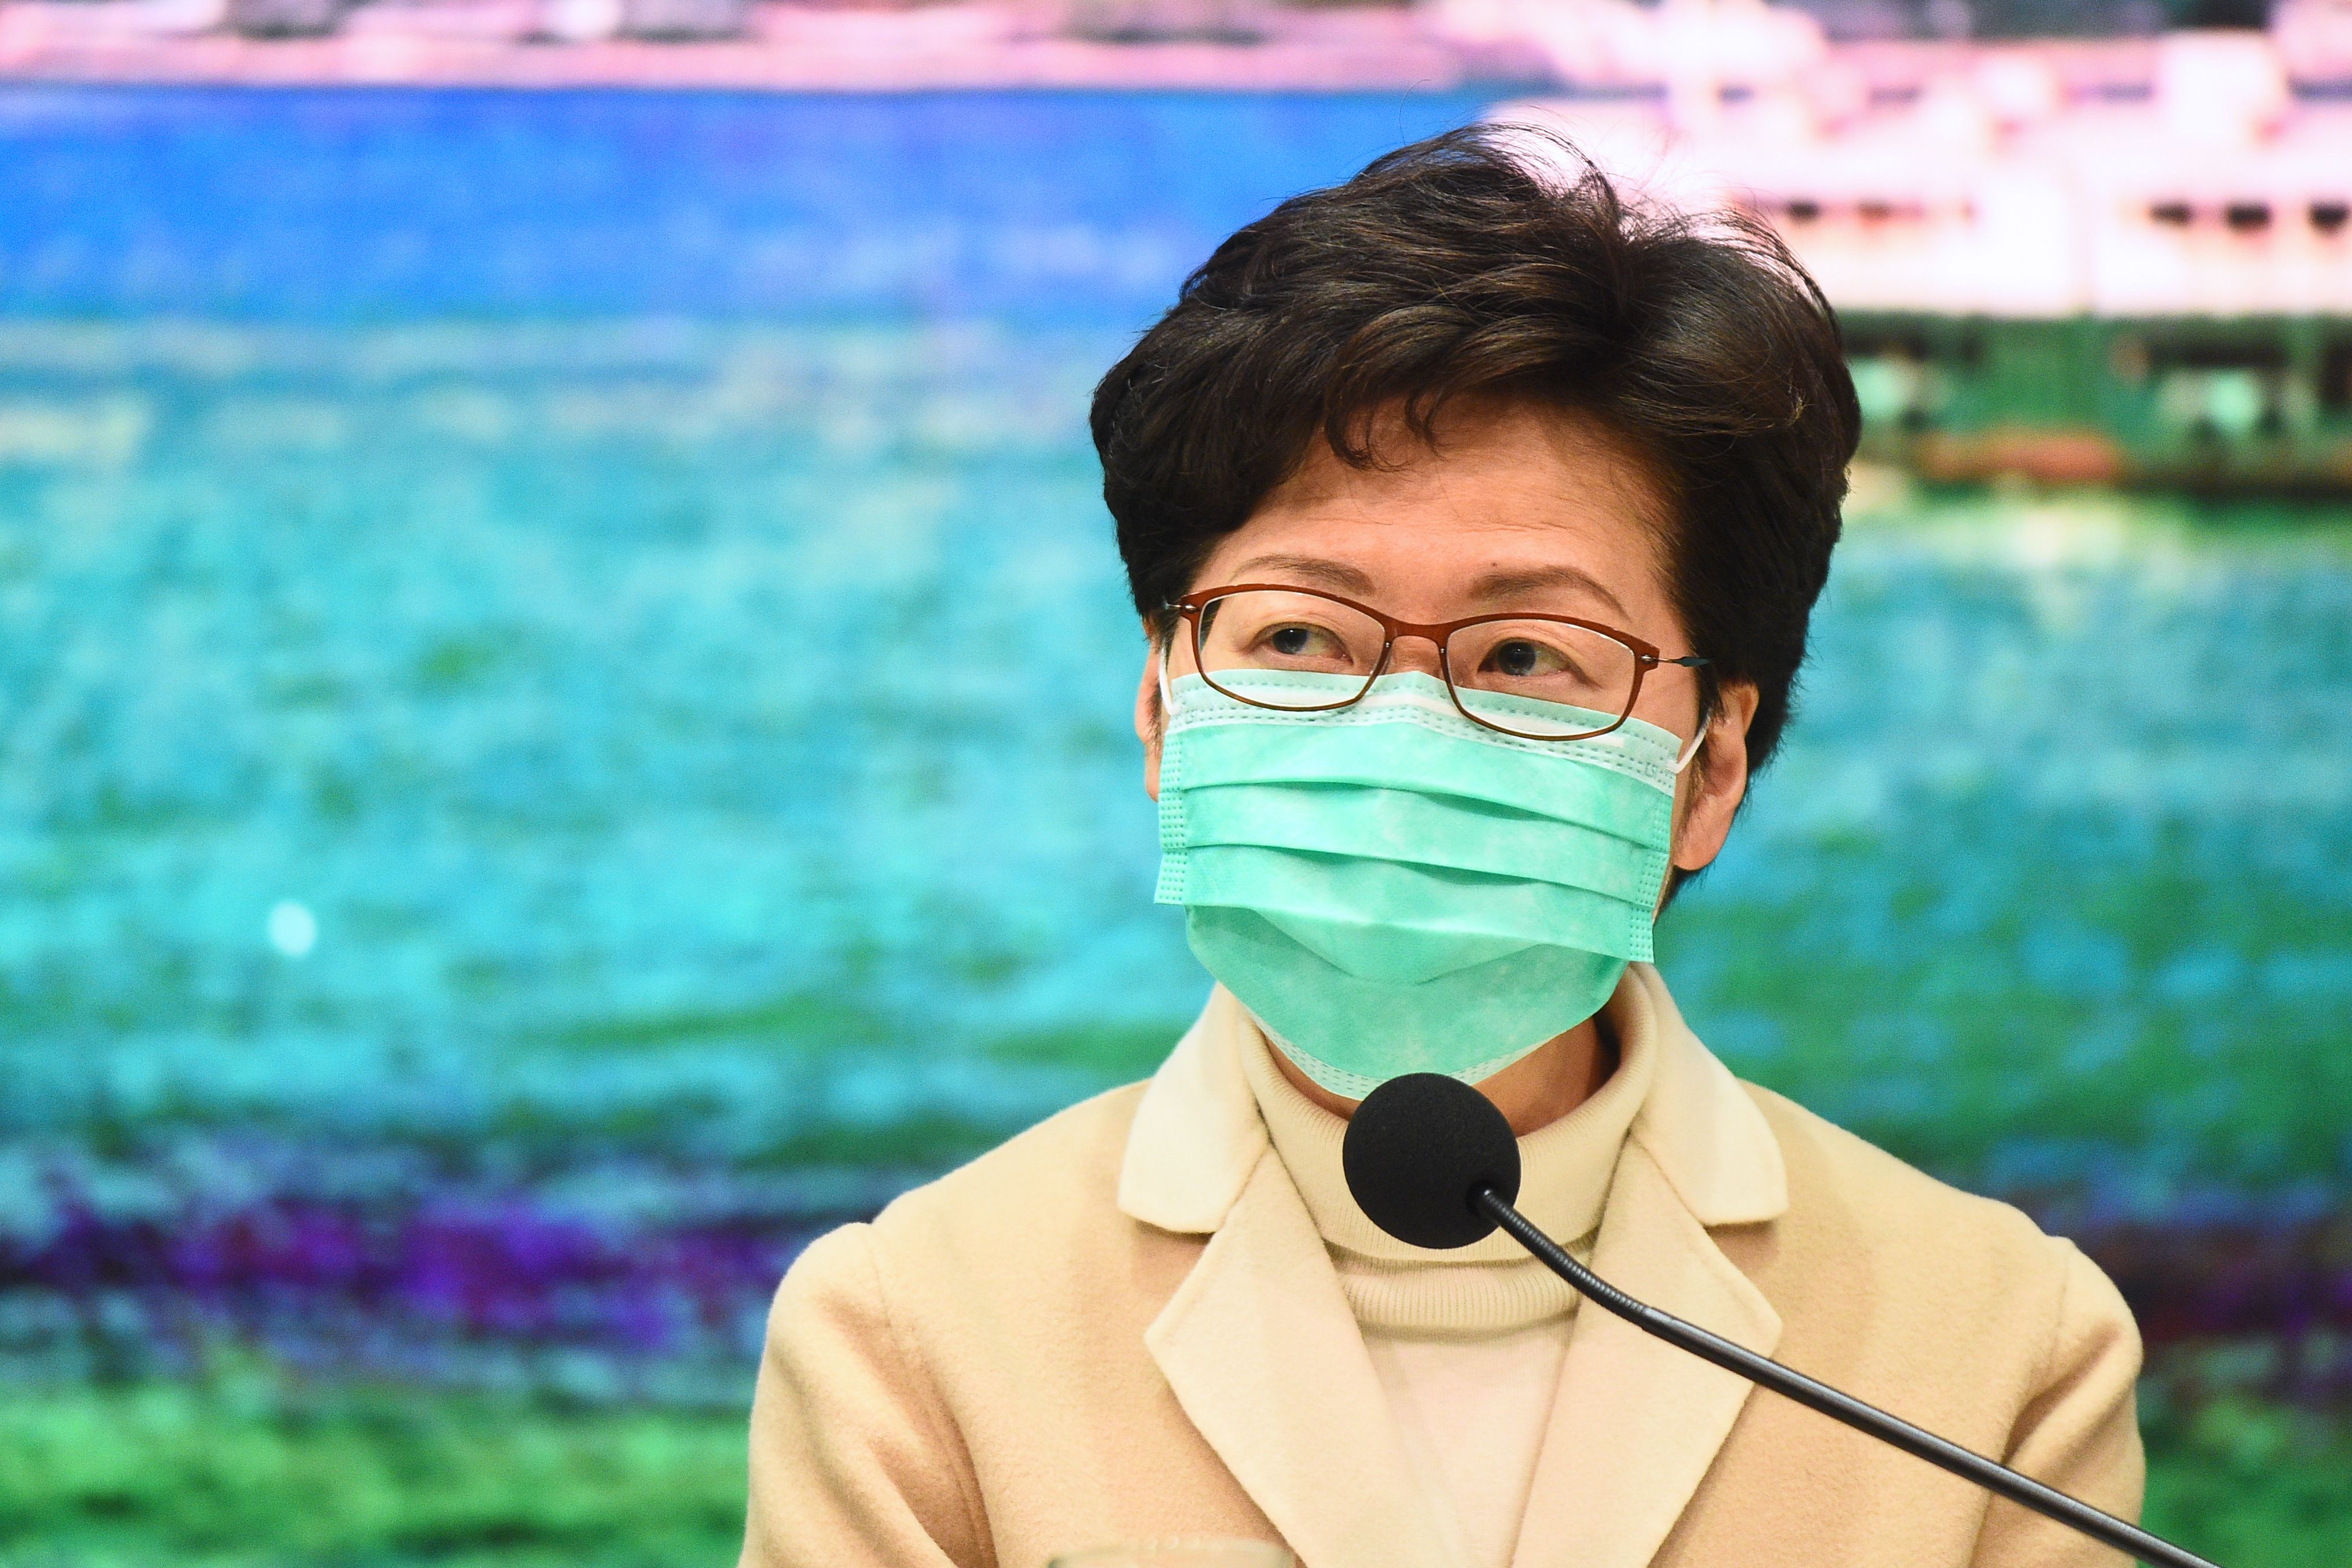 Hong Kong Chief Executive Carrie Lam at a press conference on January 31, 2020.